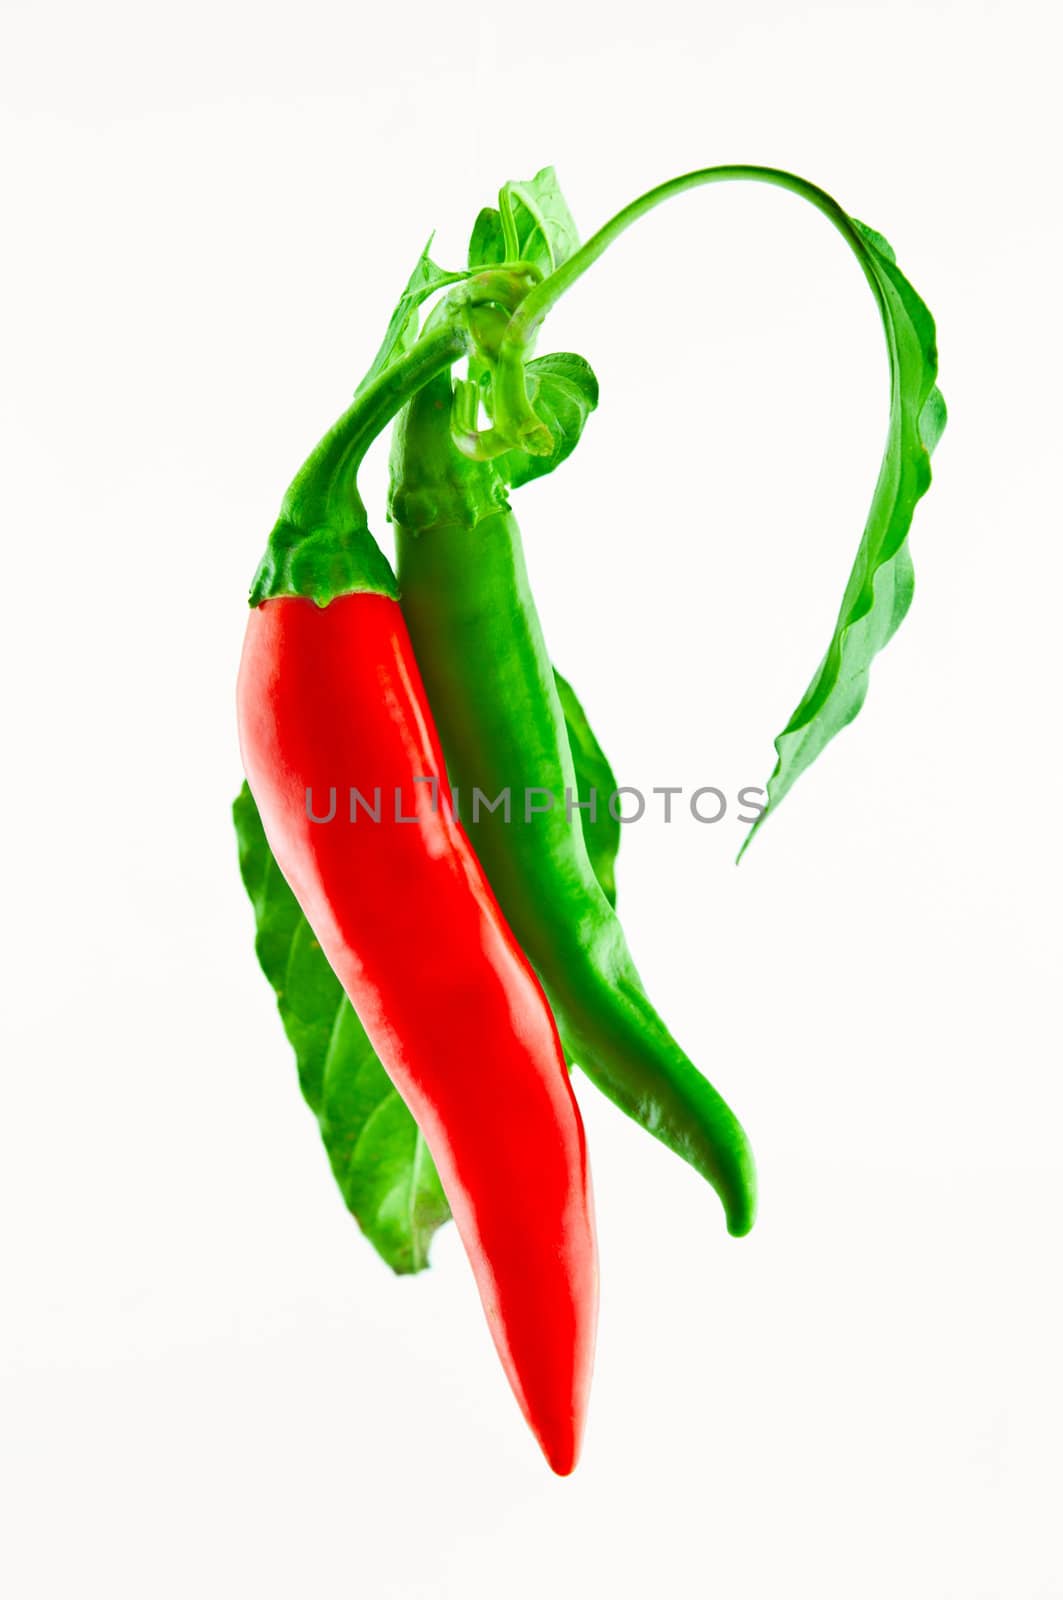 Two peppers, red and green by ben44